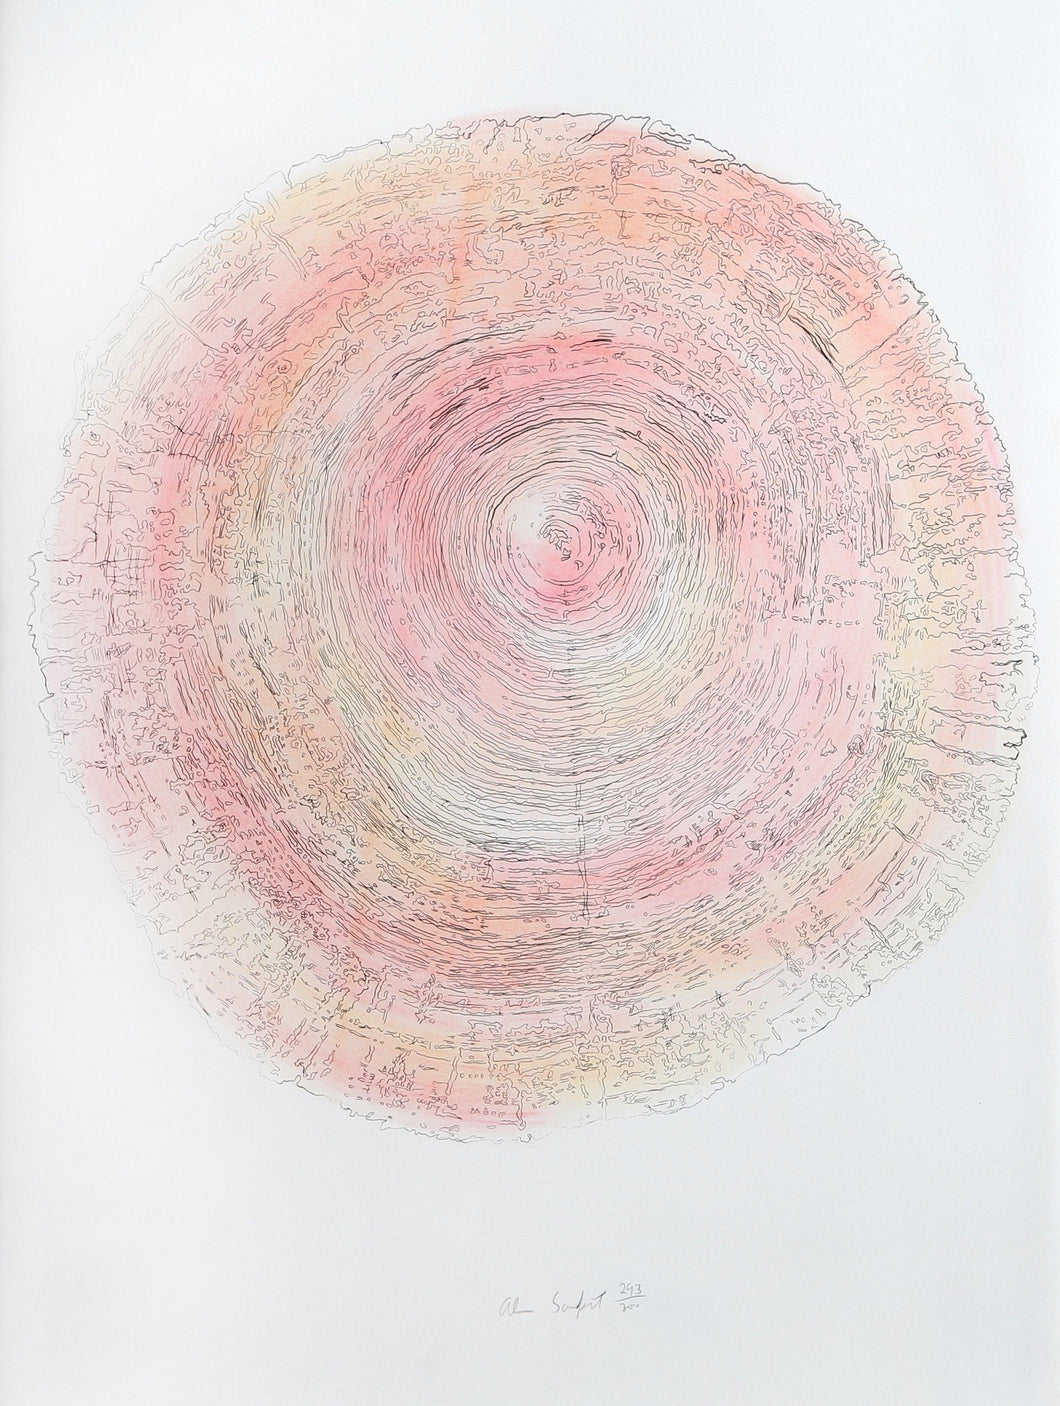 Tree Trunk Series - Pink II Lithograph | Alan Sonfist,{{product.type}}